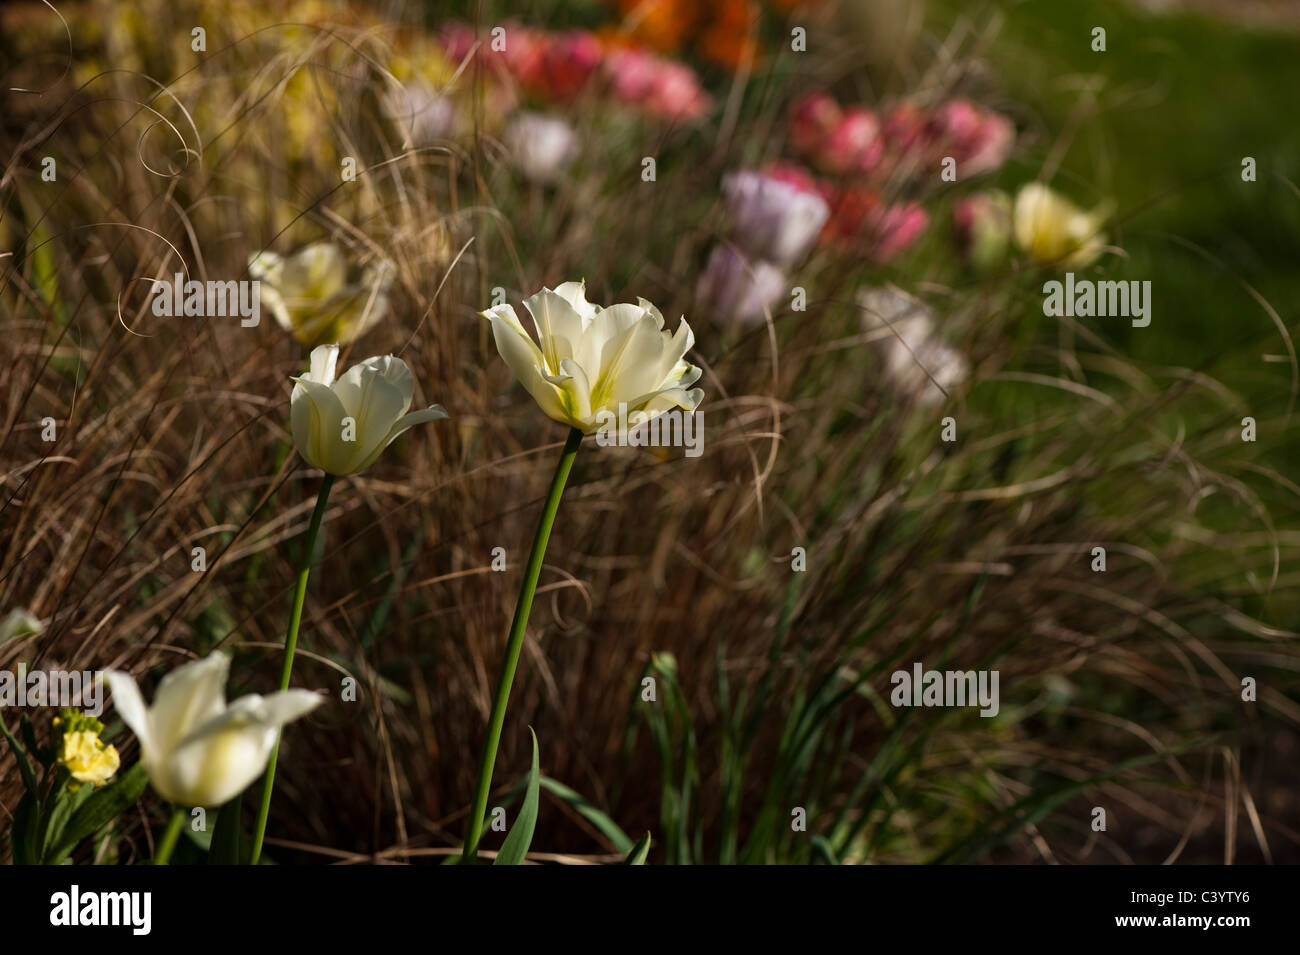 Tulipa 'Spring Green' with Carex comans Bronze in the background Stock Photo